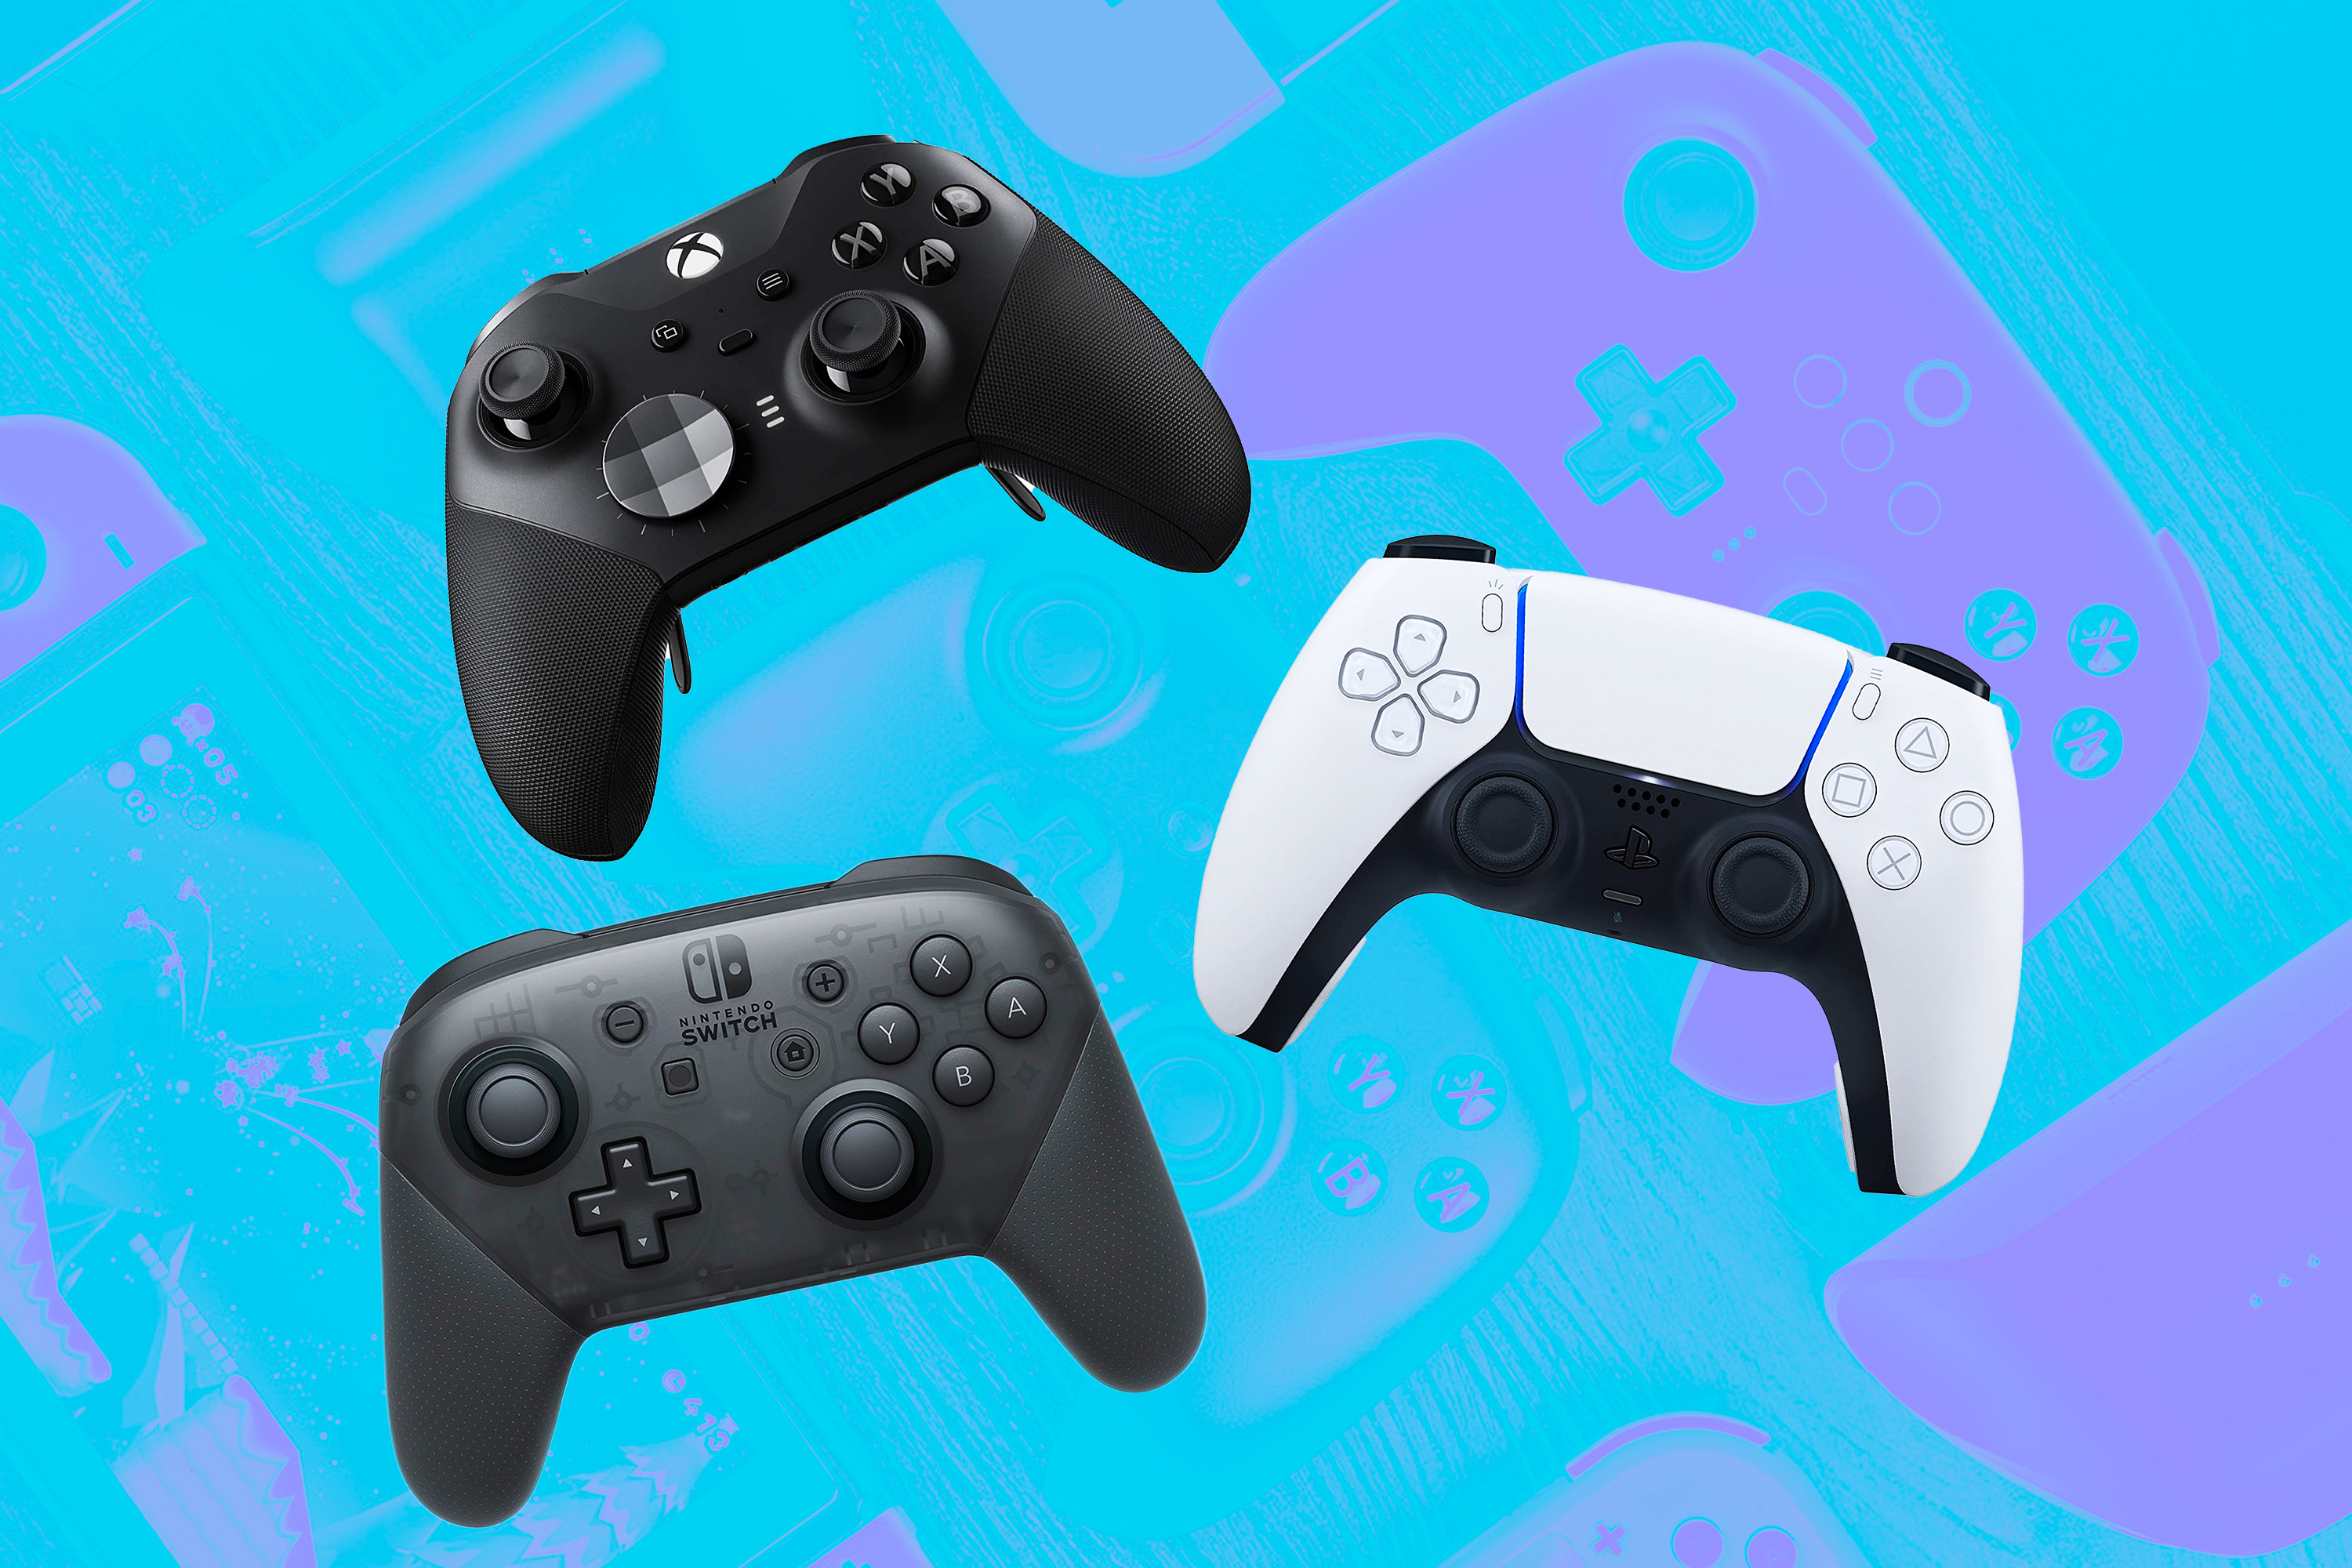 Among the best controllers for PC gaming are Sony’s DualSense, Nintendo’s Switch Pro controller, and the Xbox Elite Series 2 controller, all arranged in a graphic.